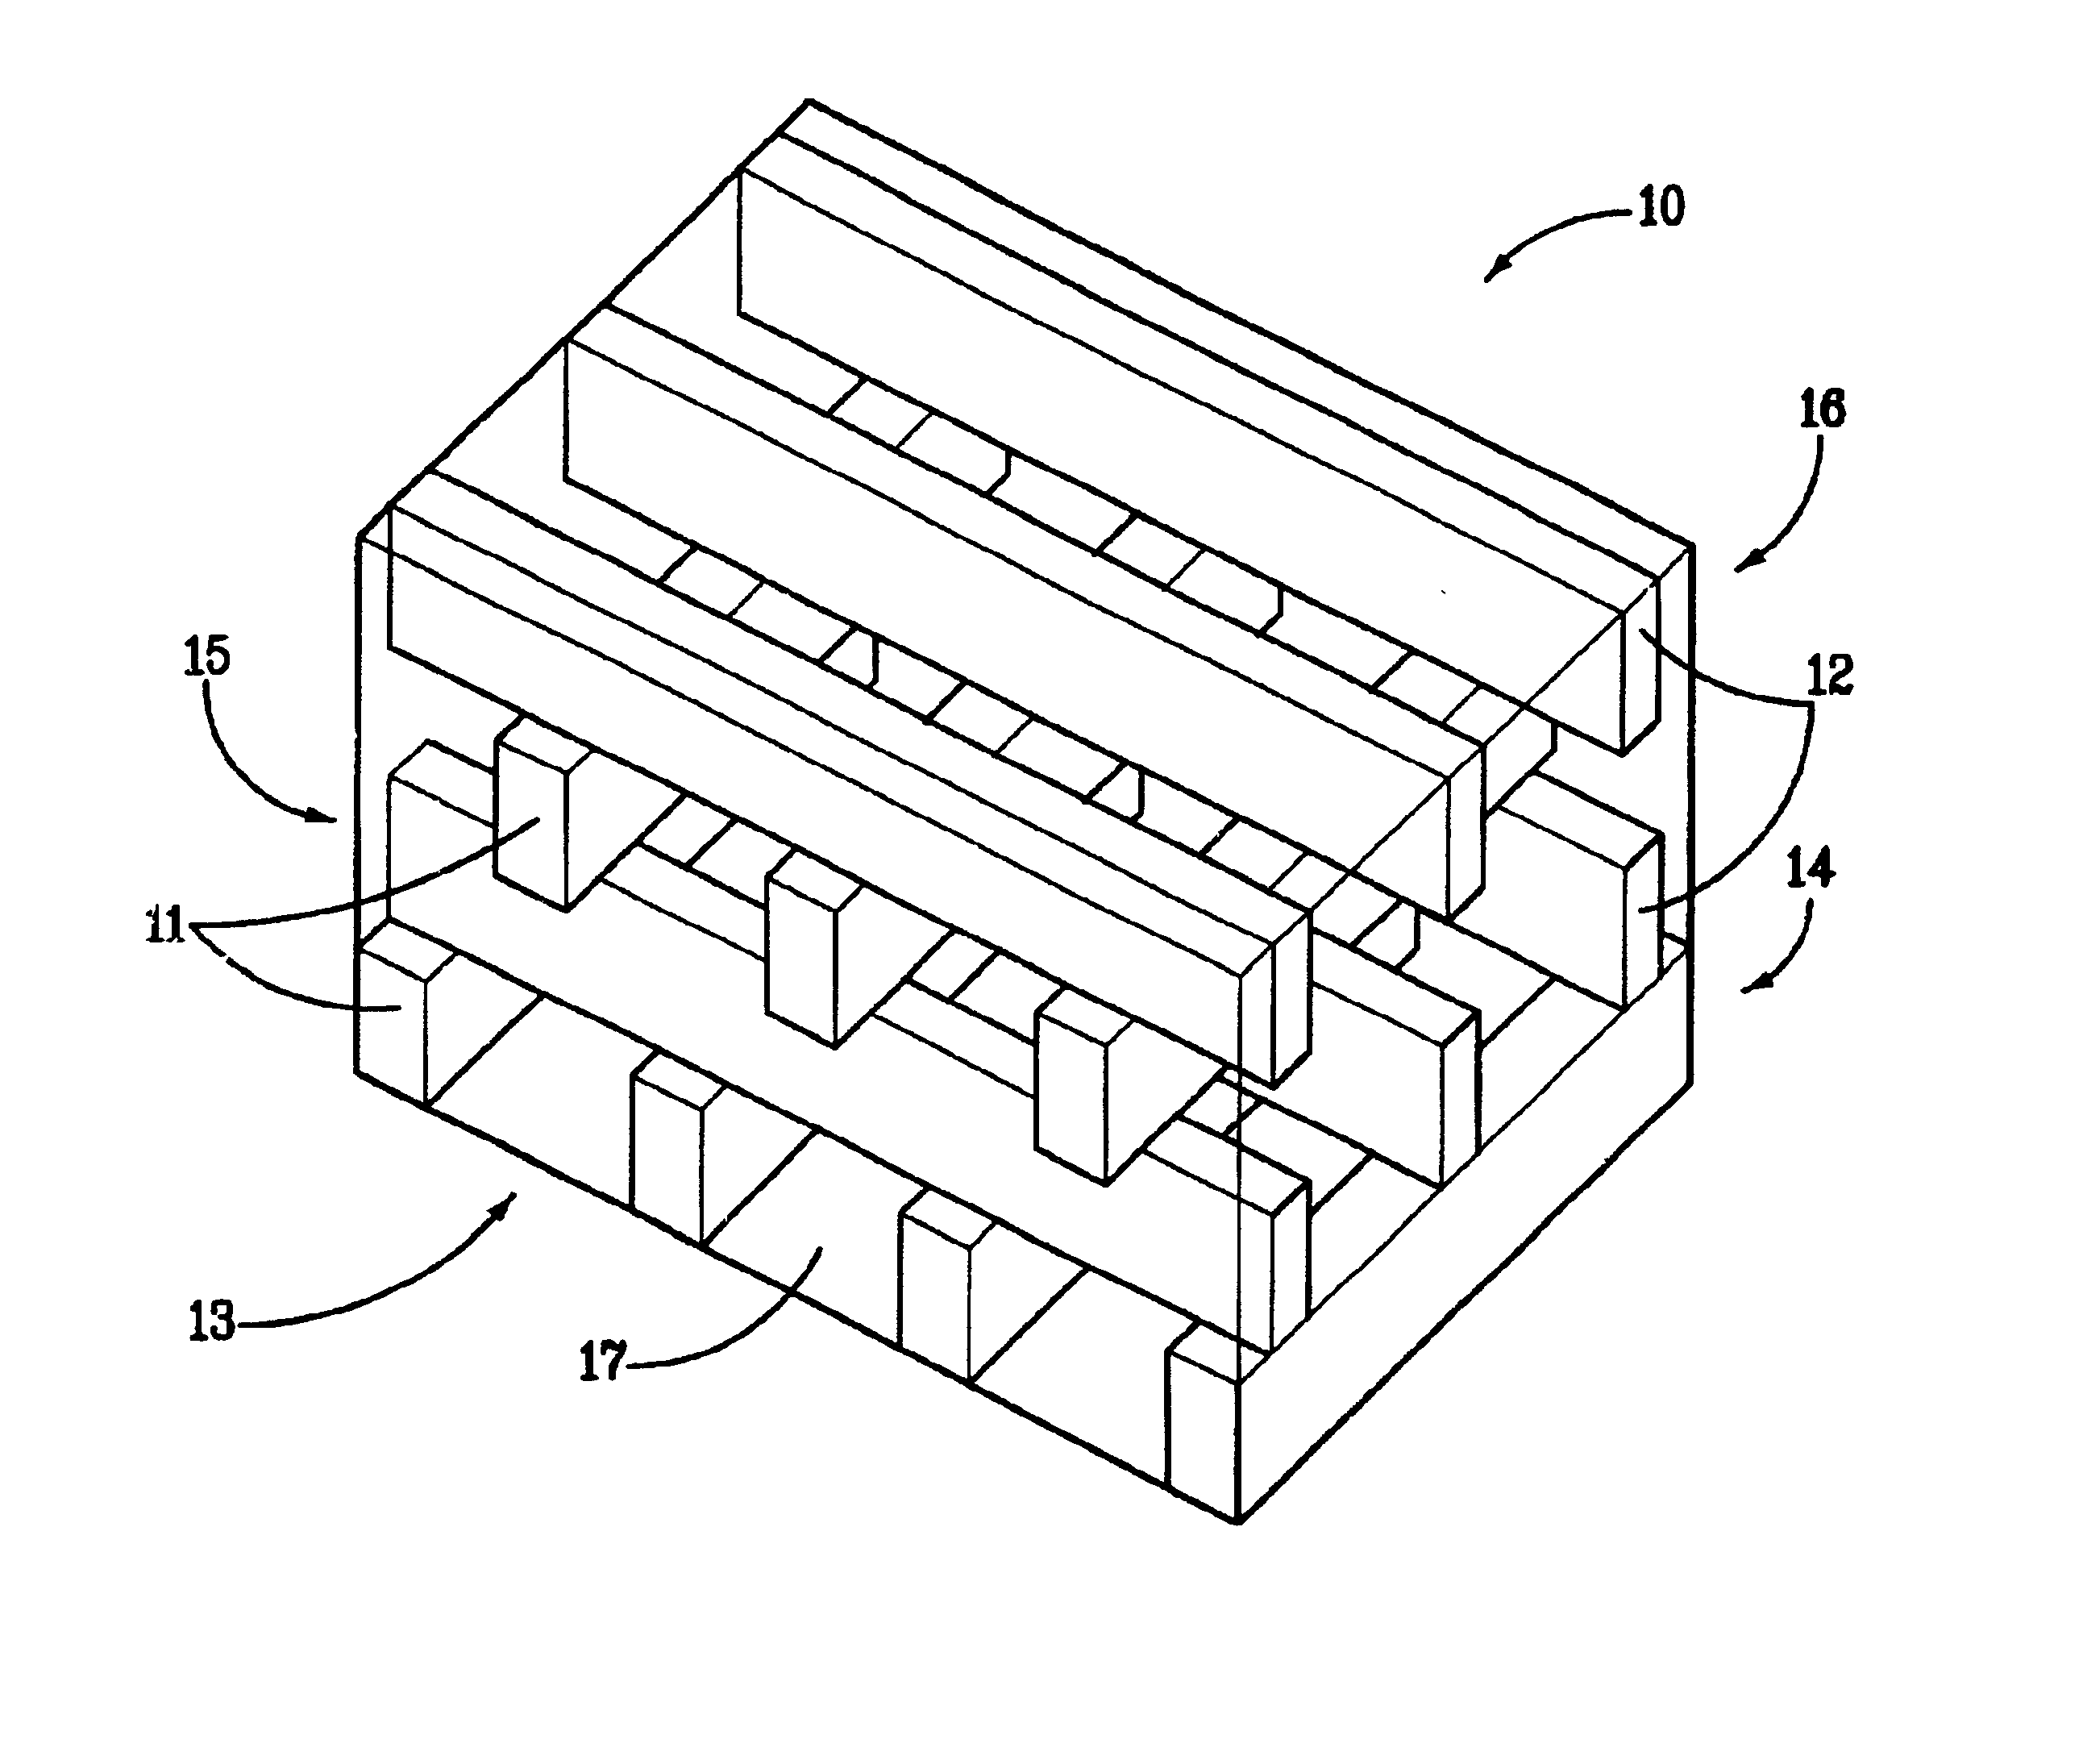 Method to fabricate layered material compositions